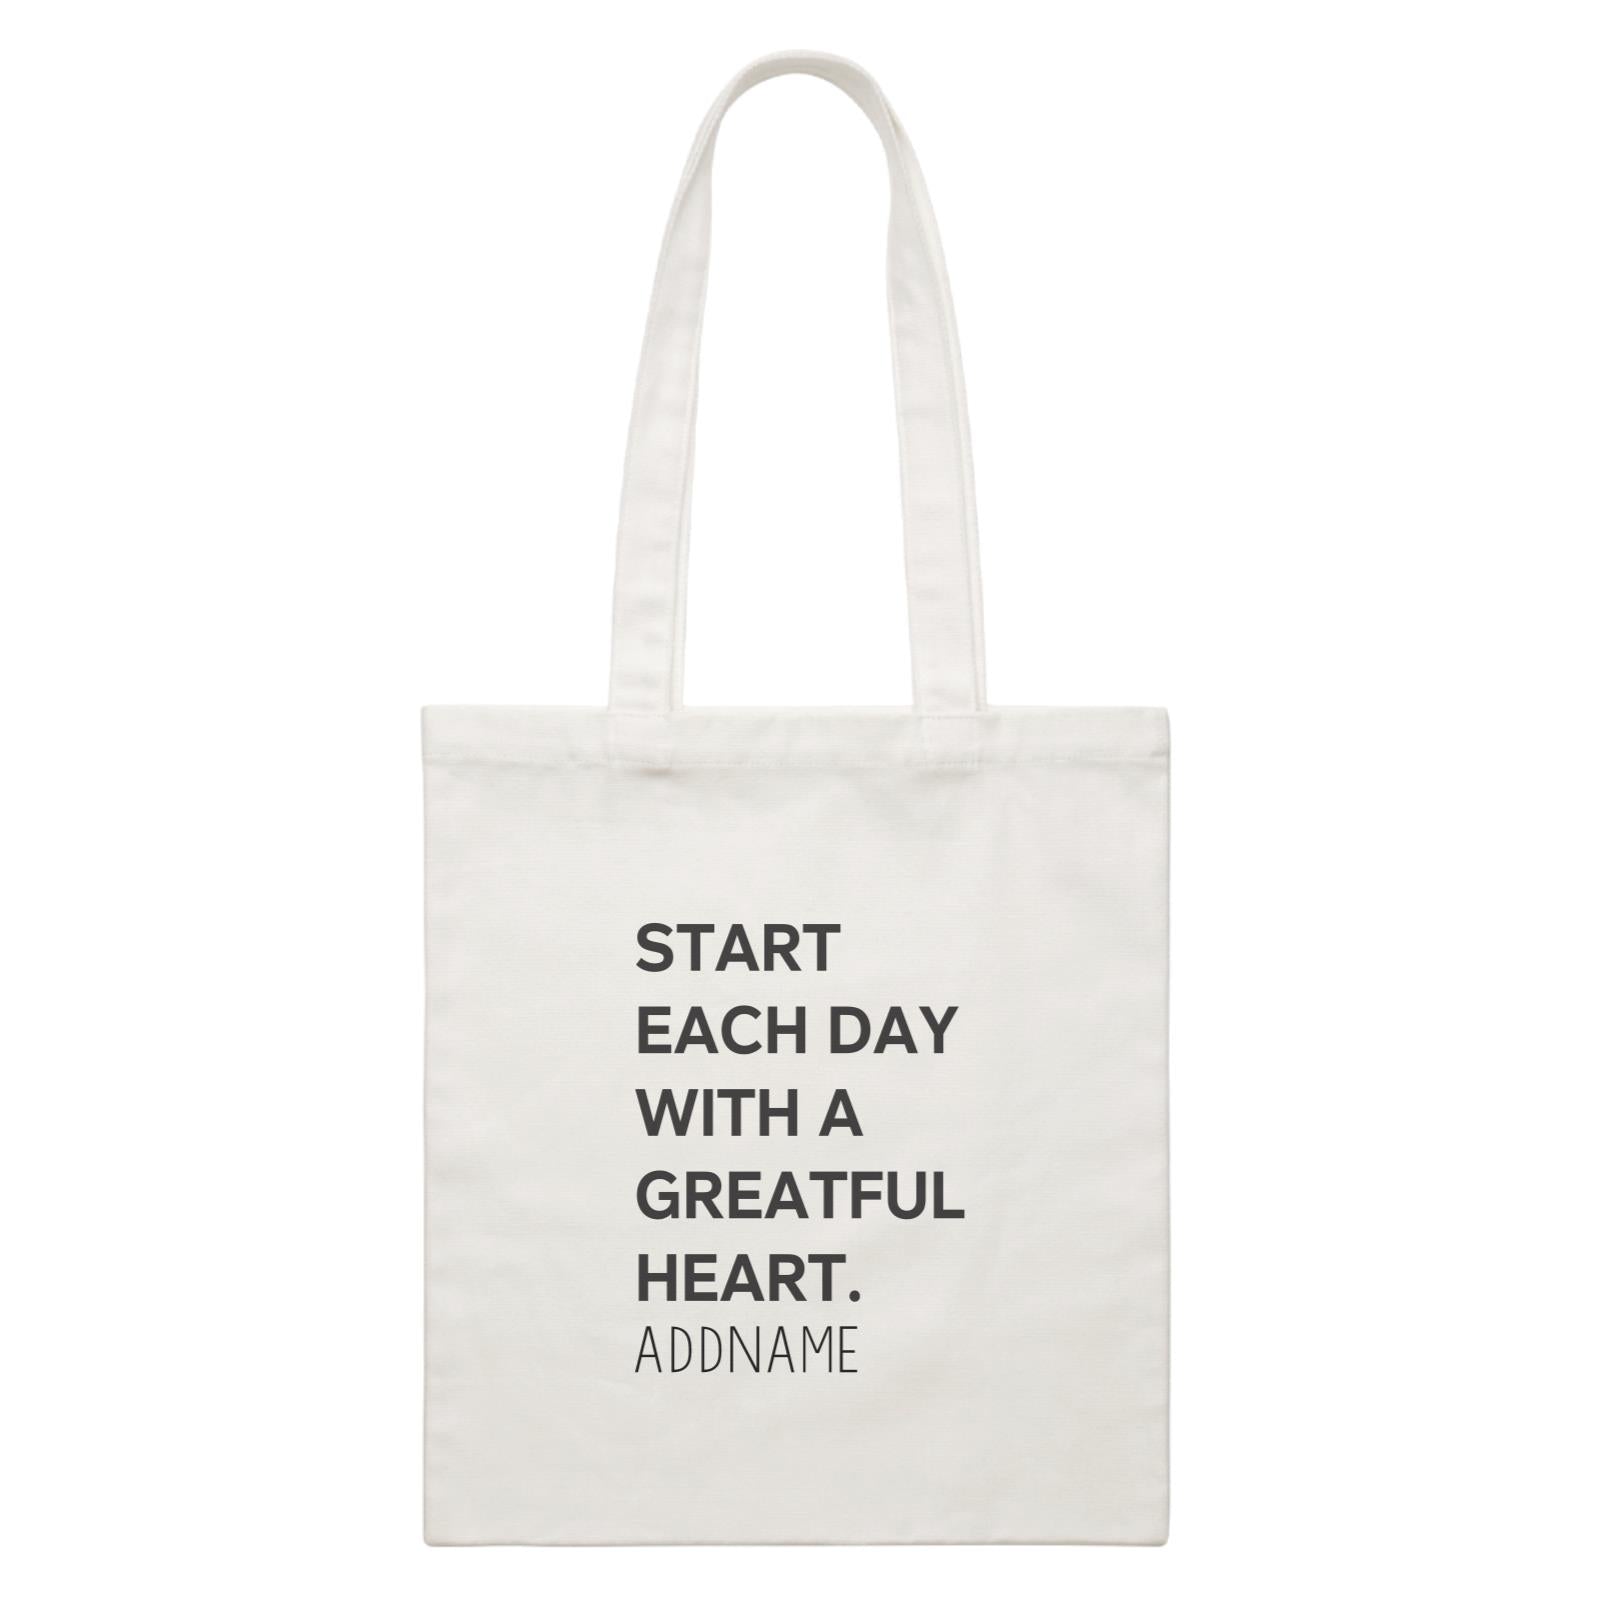 Inspiration Quotes Start Each Day With A Greatful Heart Addname White Canvas Bag